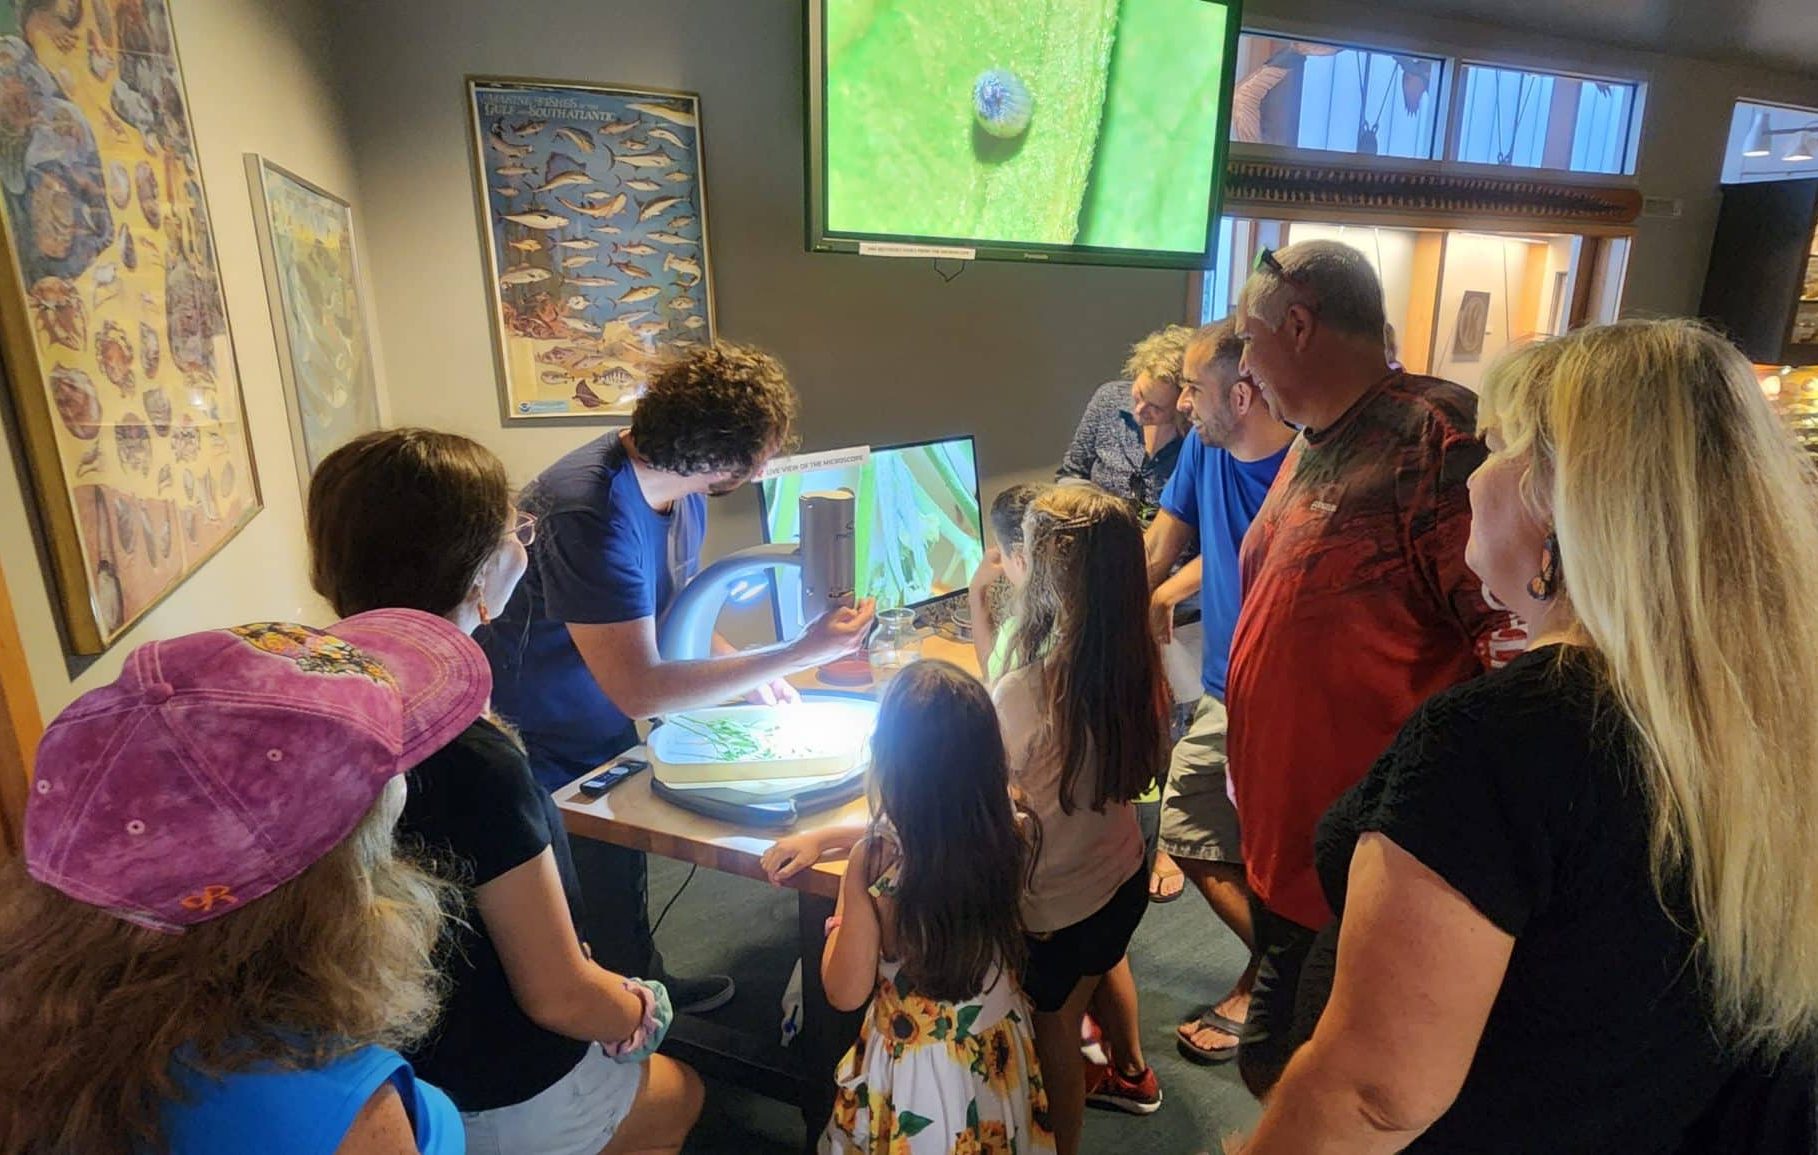 Visitors captivated by the monarch life cycle. Kennedy Hanson shows the crowd live monarch caterpillars at various stages under a microscope.